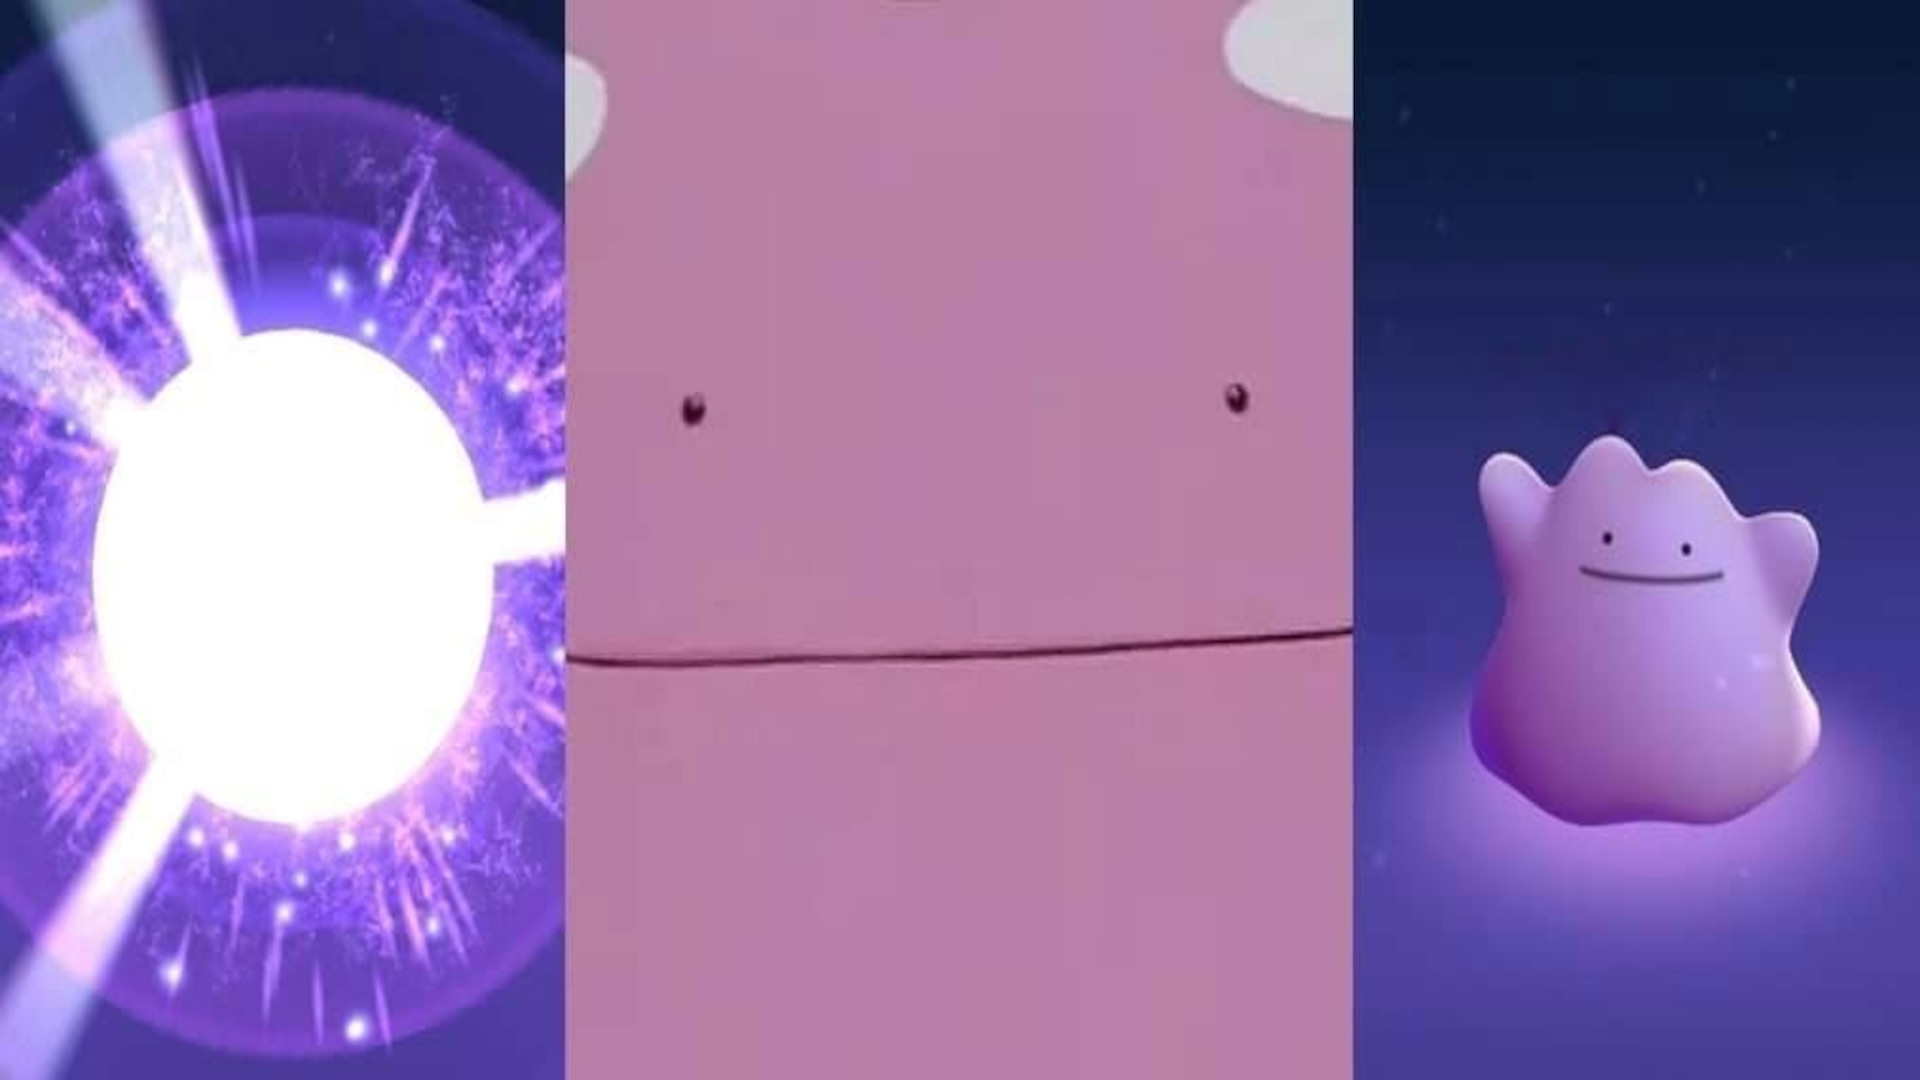 ULTIMATE How to catch a Ditto Guide 2023 in, Pokémon GO